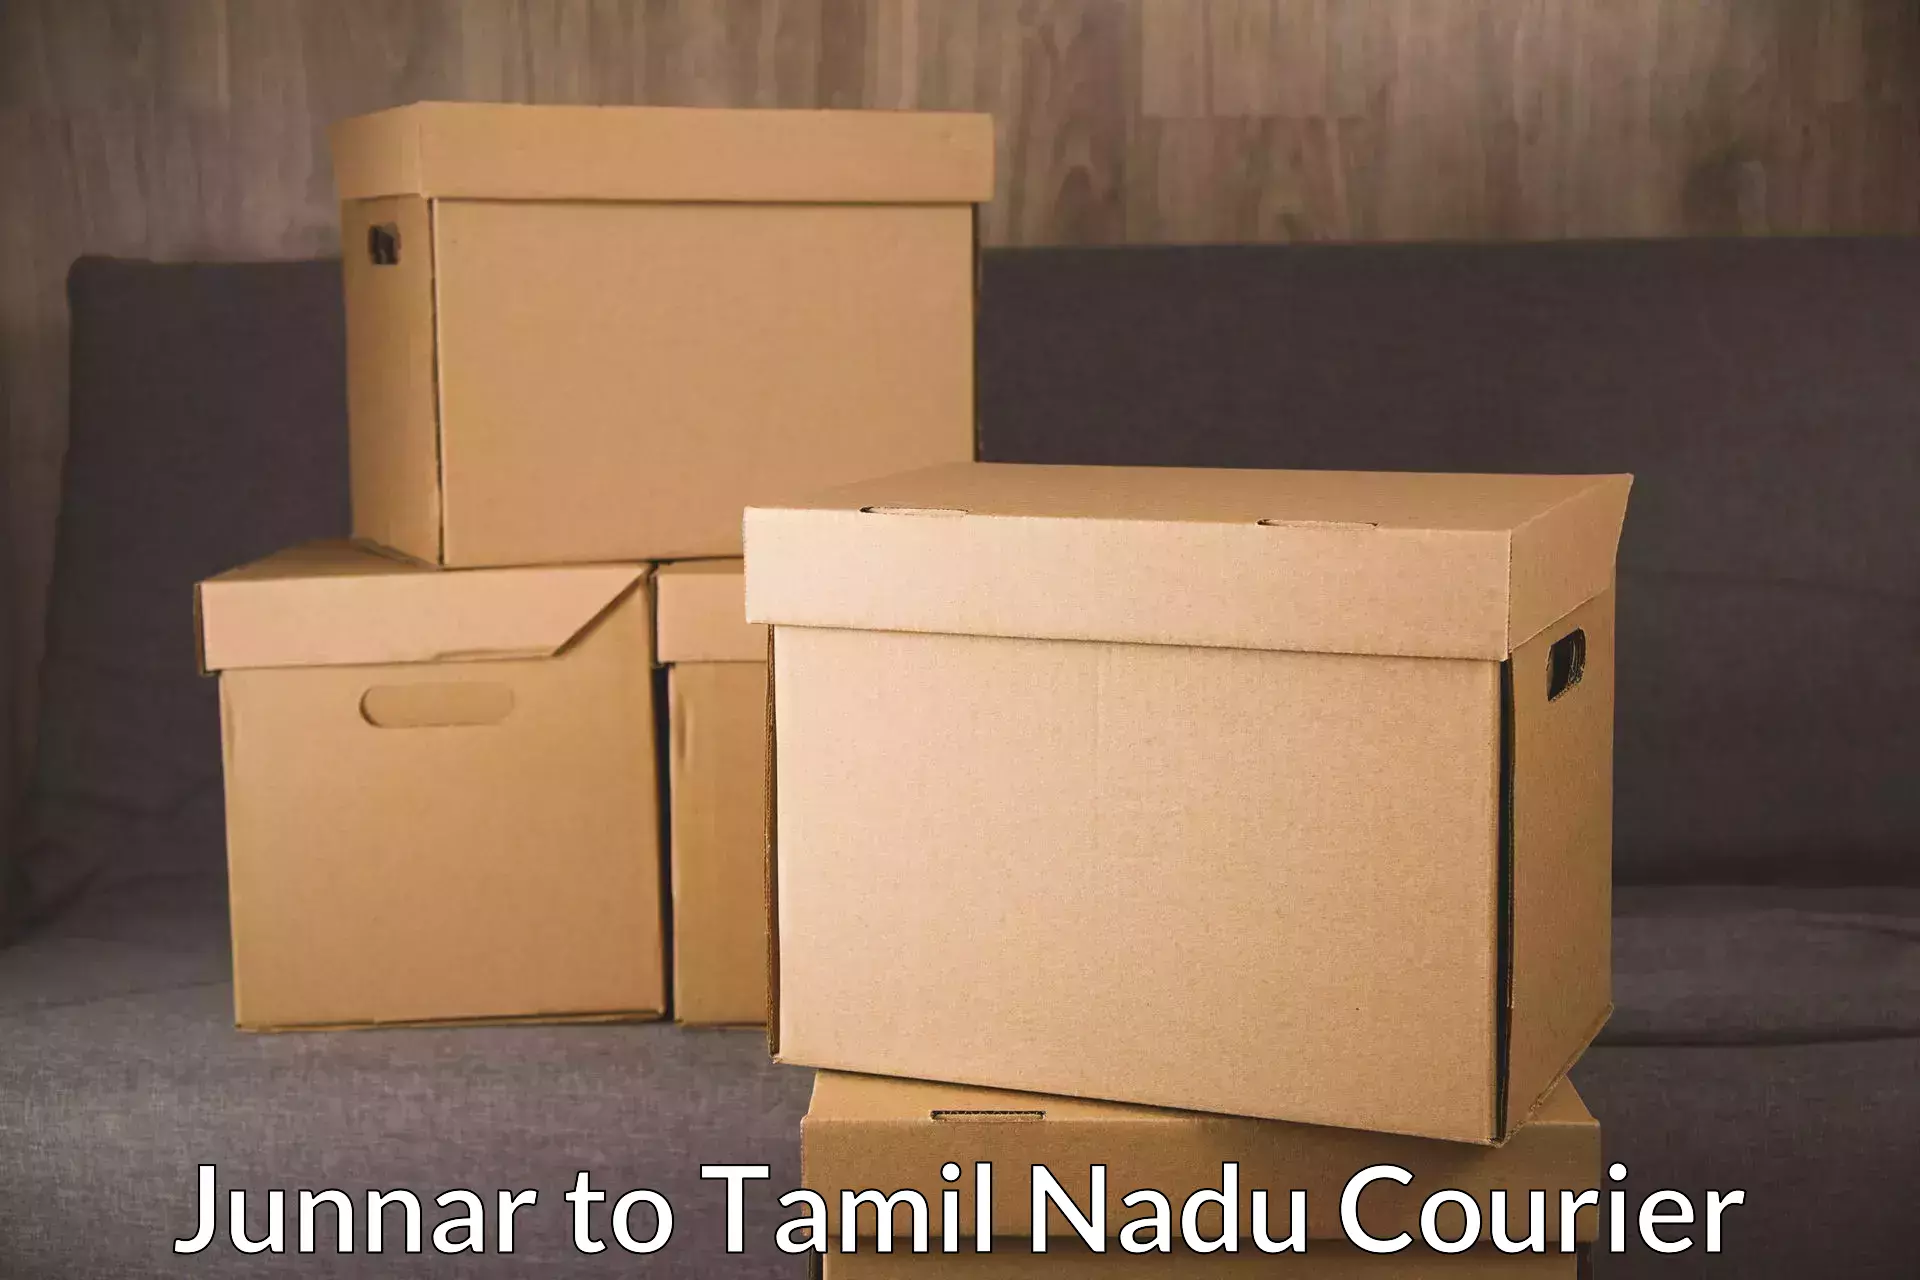 Courier app Junnar to Sri Ramachandra Institute of Higher Education and Research Chennai